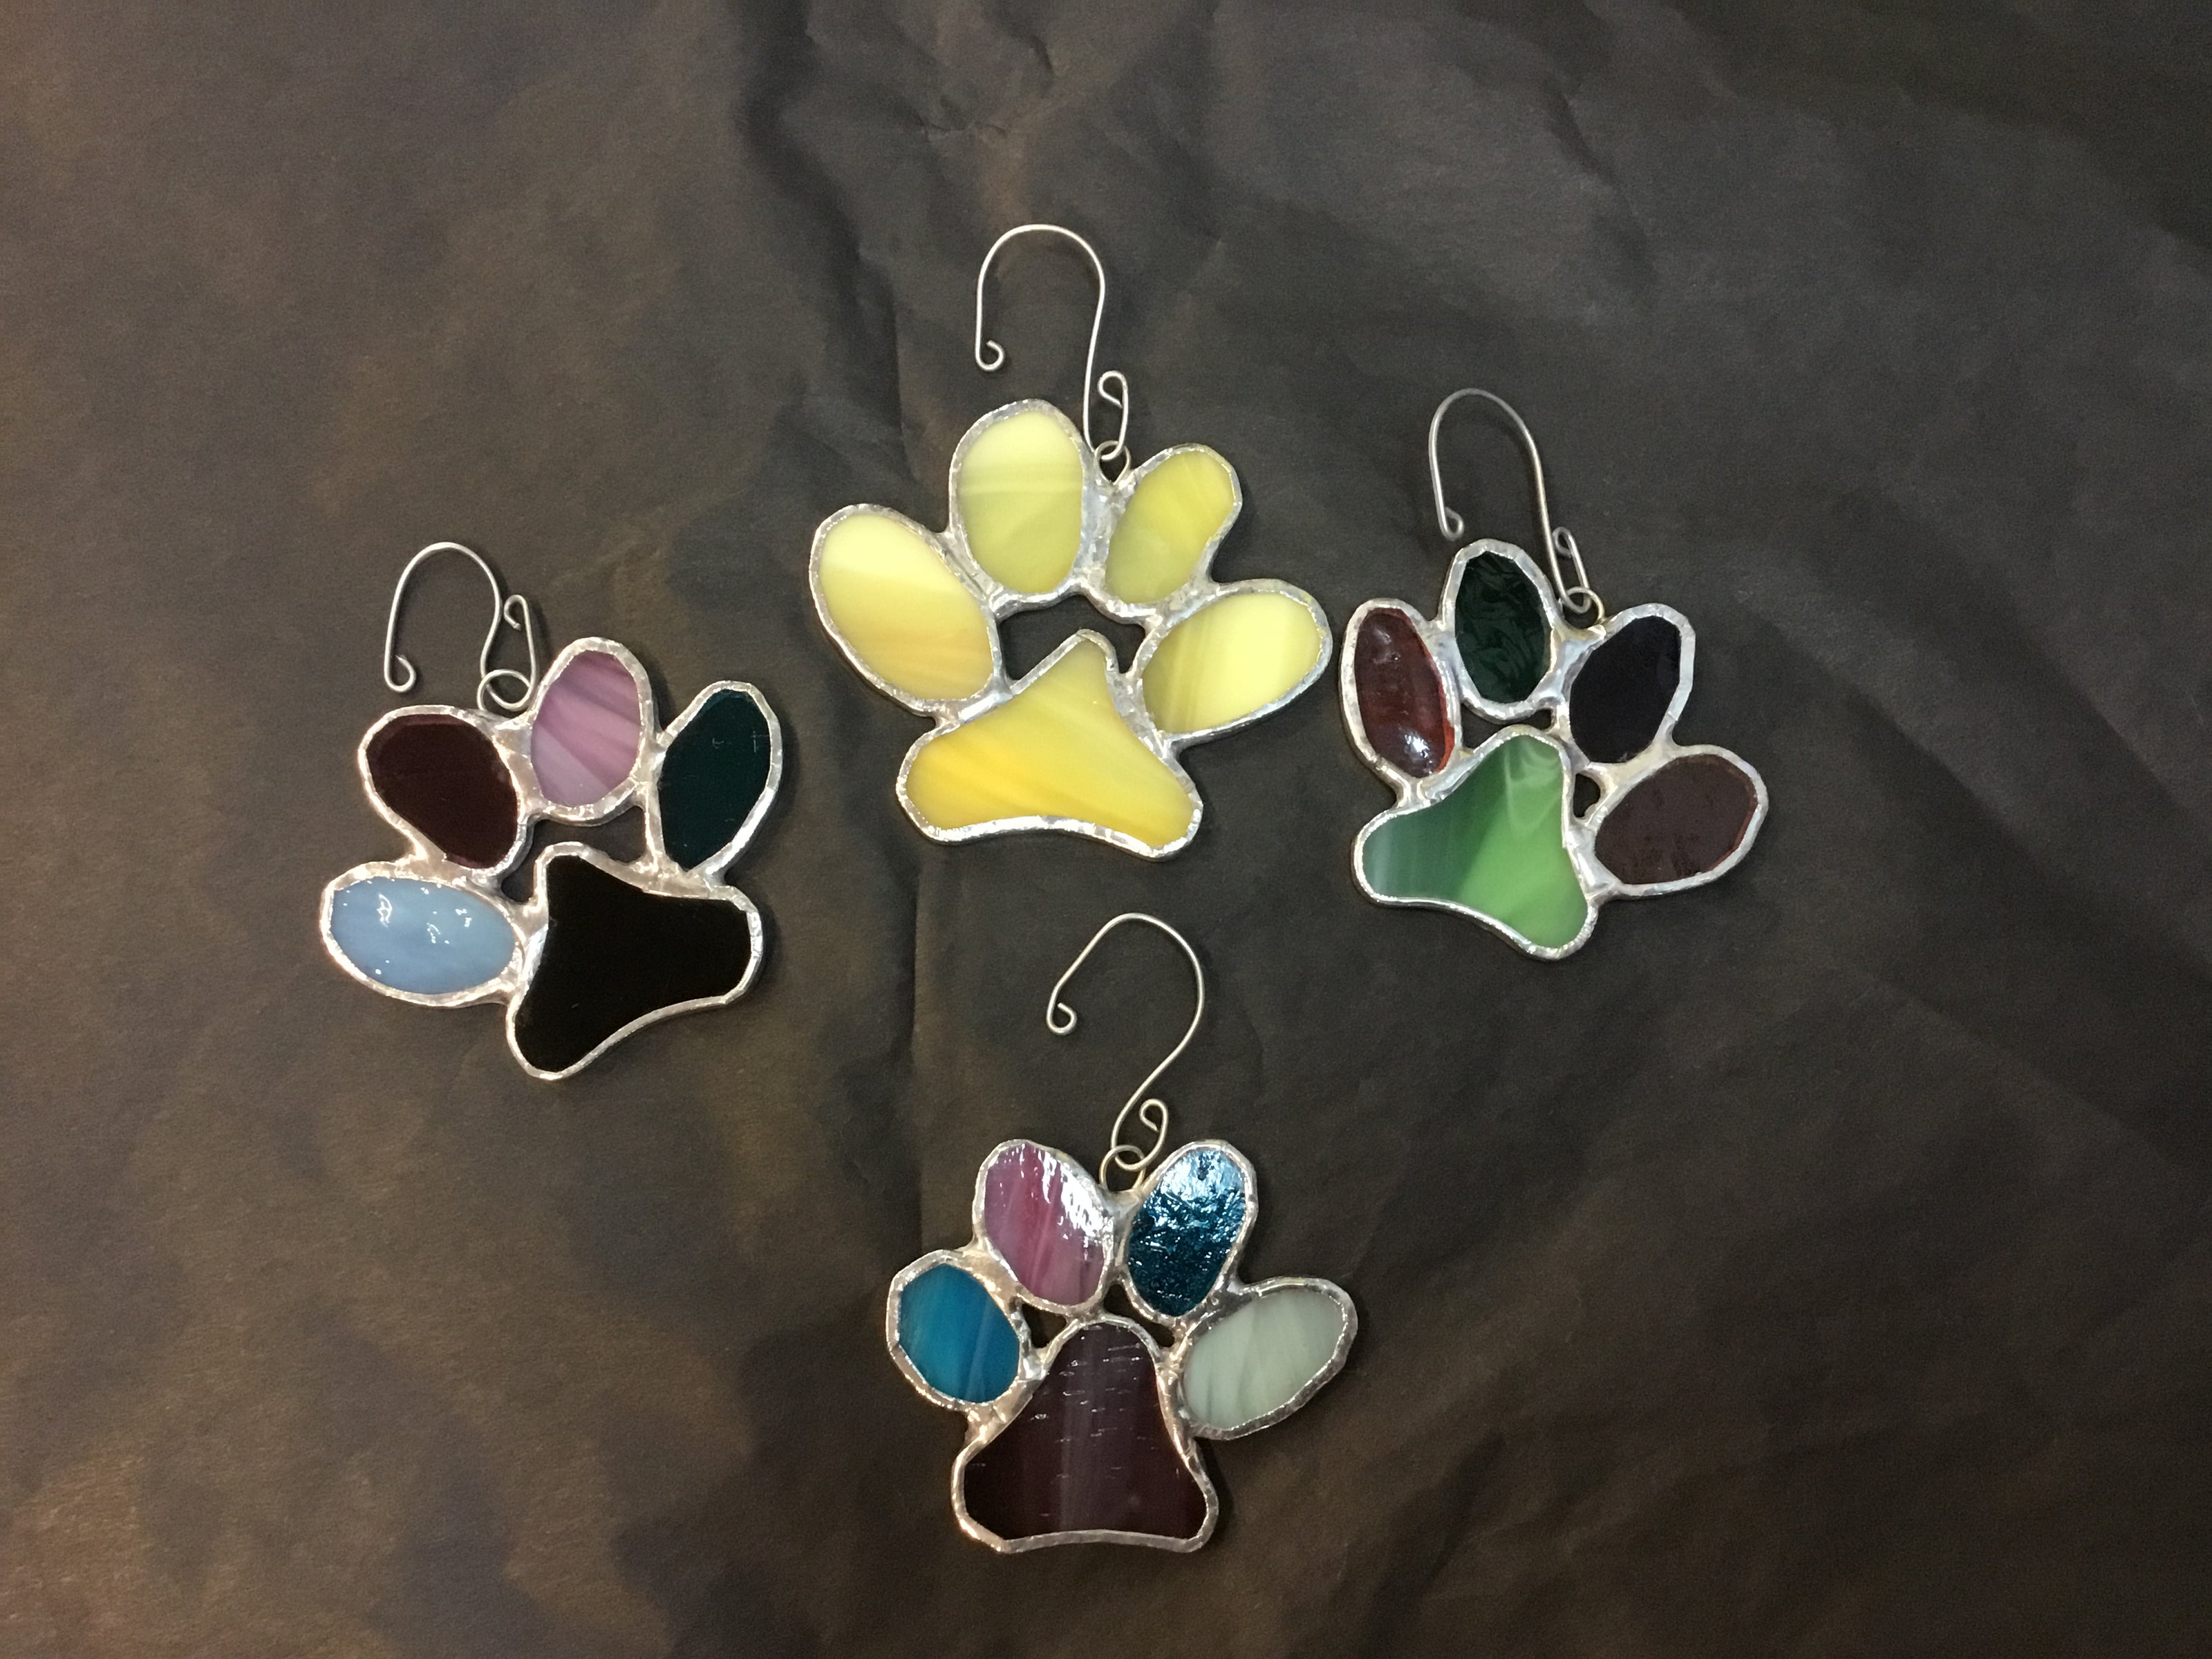 Stained Glass Paw Print Ornaments